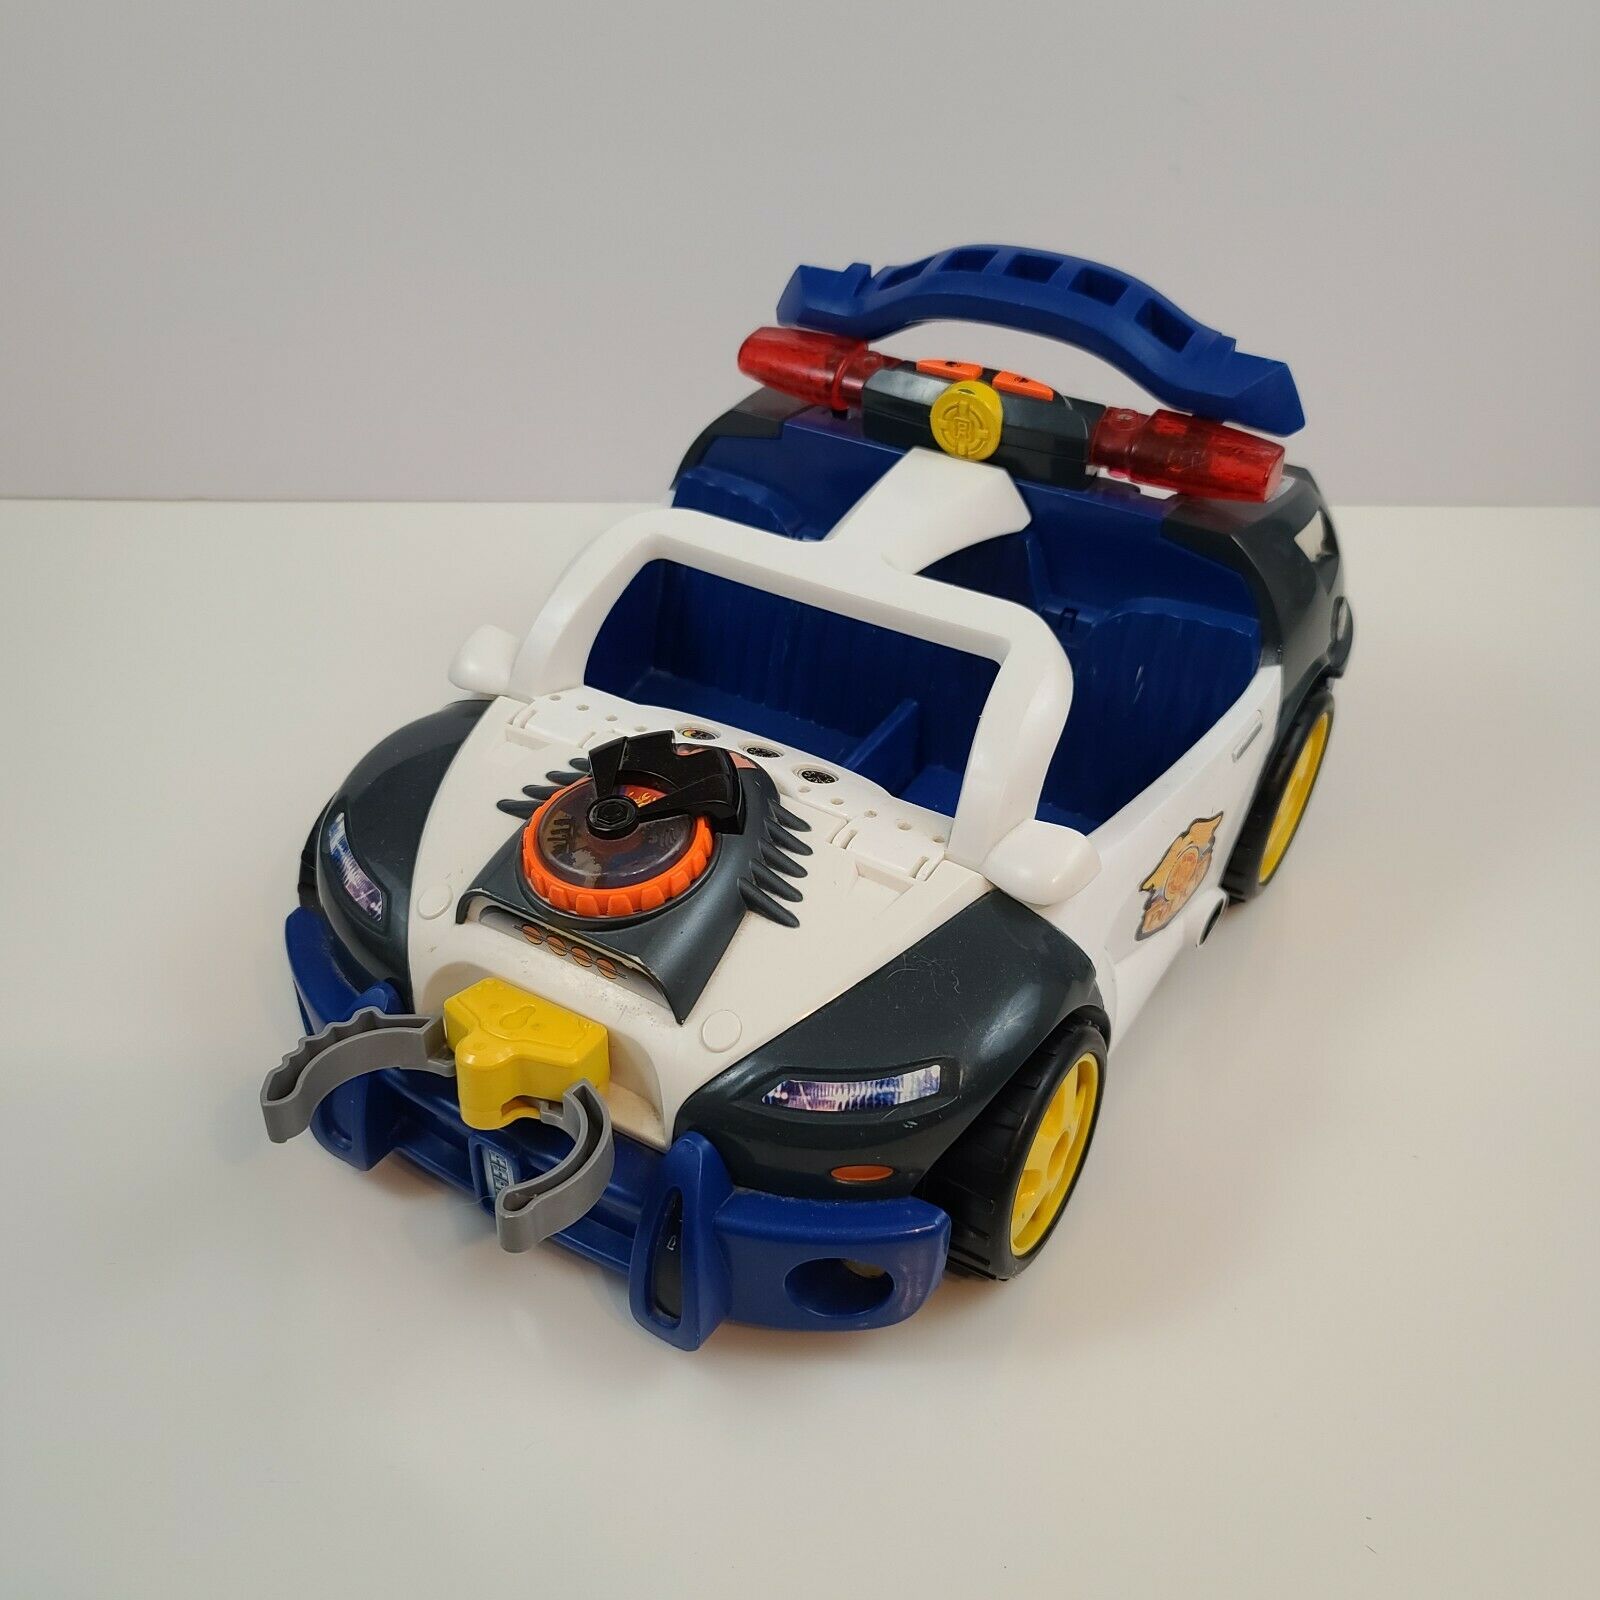 Fisher Price Rescue Heroes 2001 Police Car Cruiser Vehicle